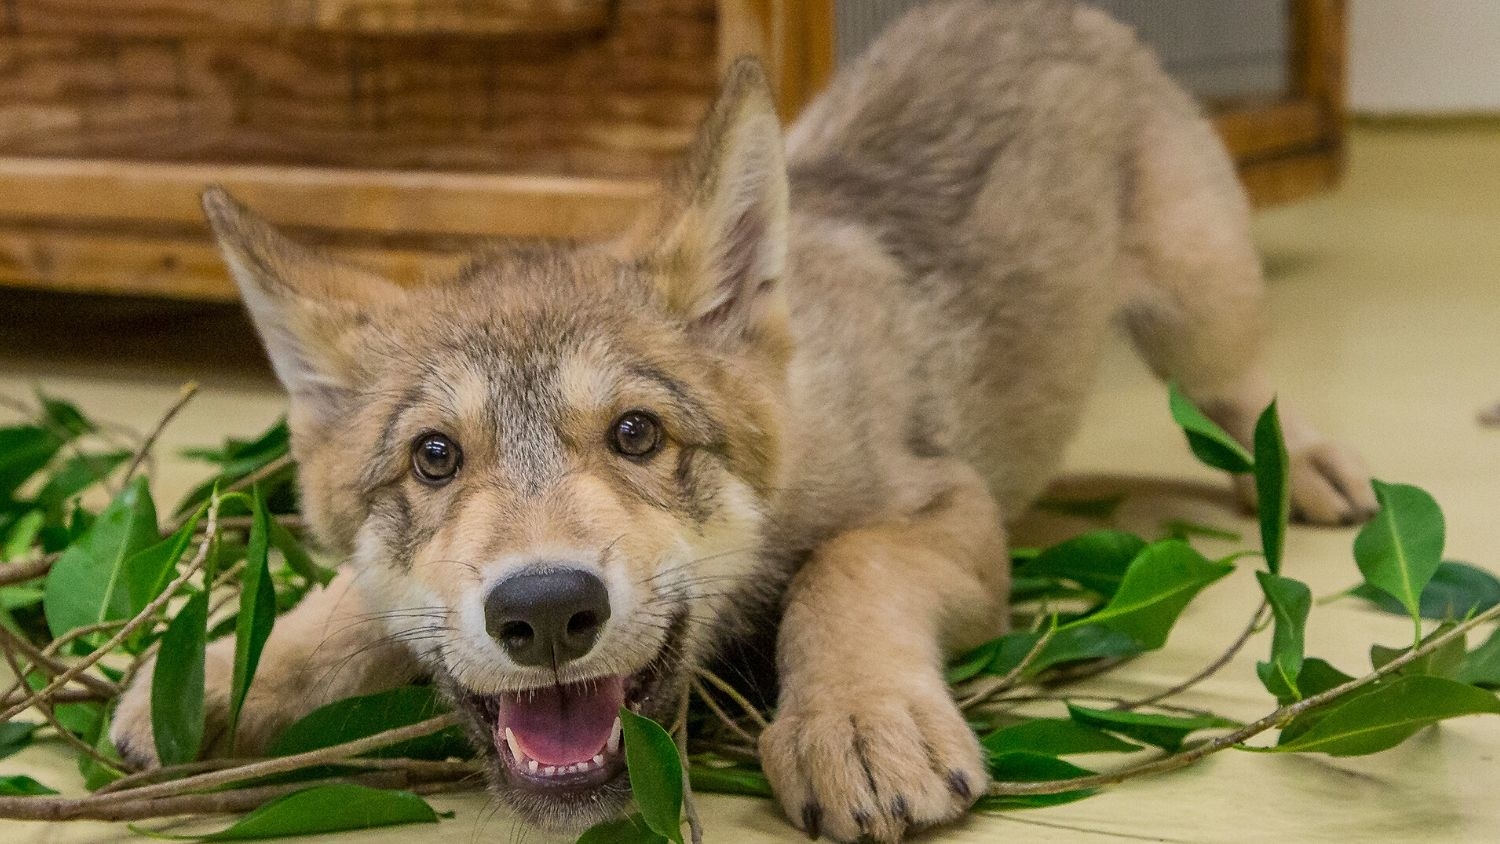 Shadow, a wolf at the San Diego Zoo, when he was a pup in 2014.